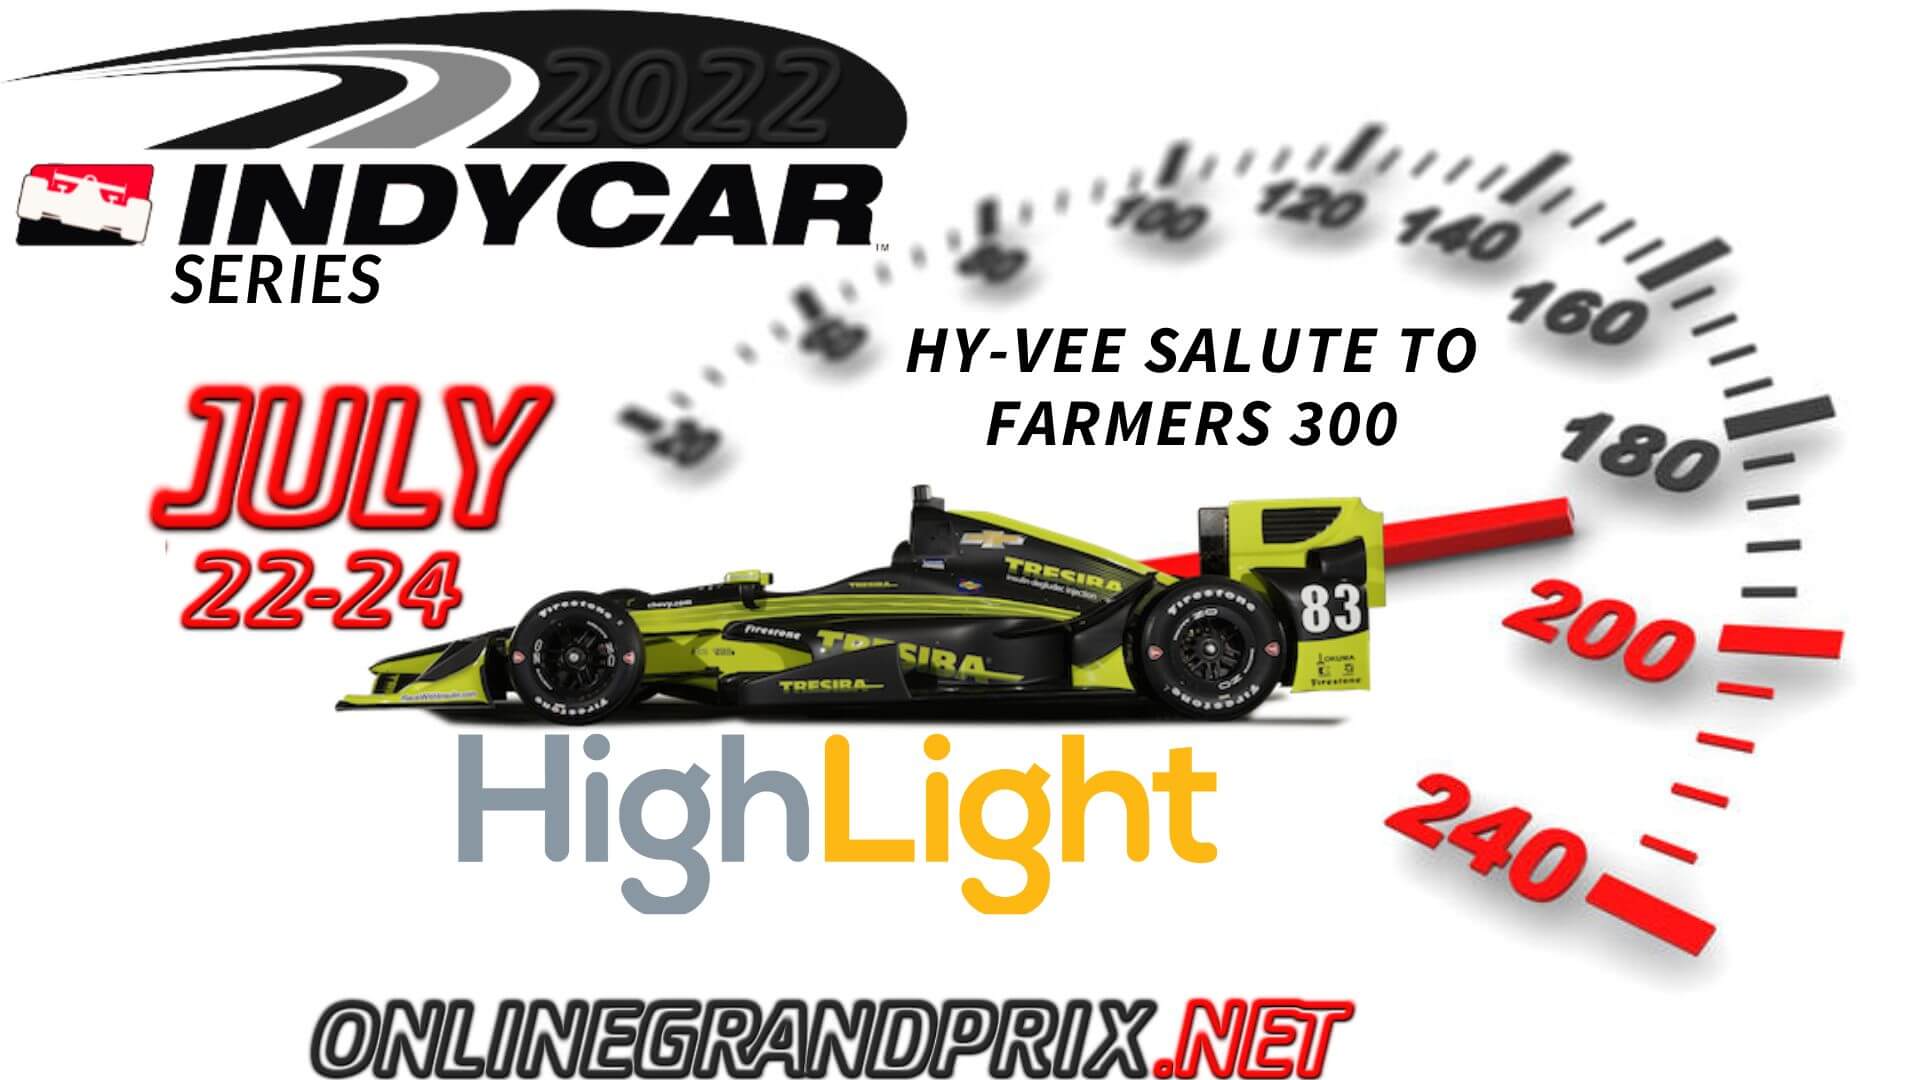 Hy Vee Salute To Farmers 300 Highlights INDYCAR 2022